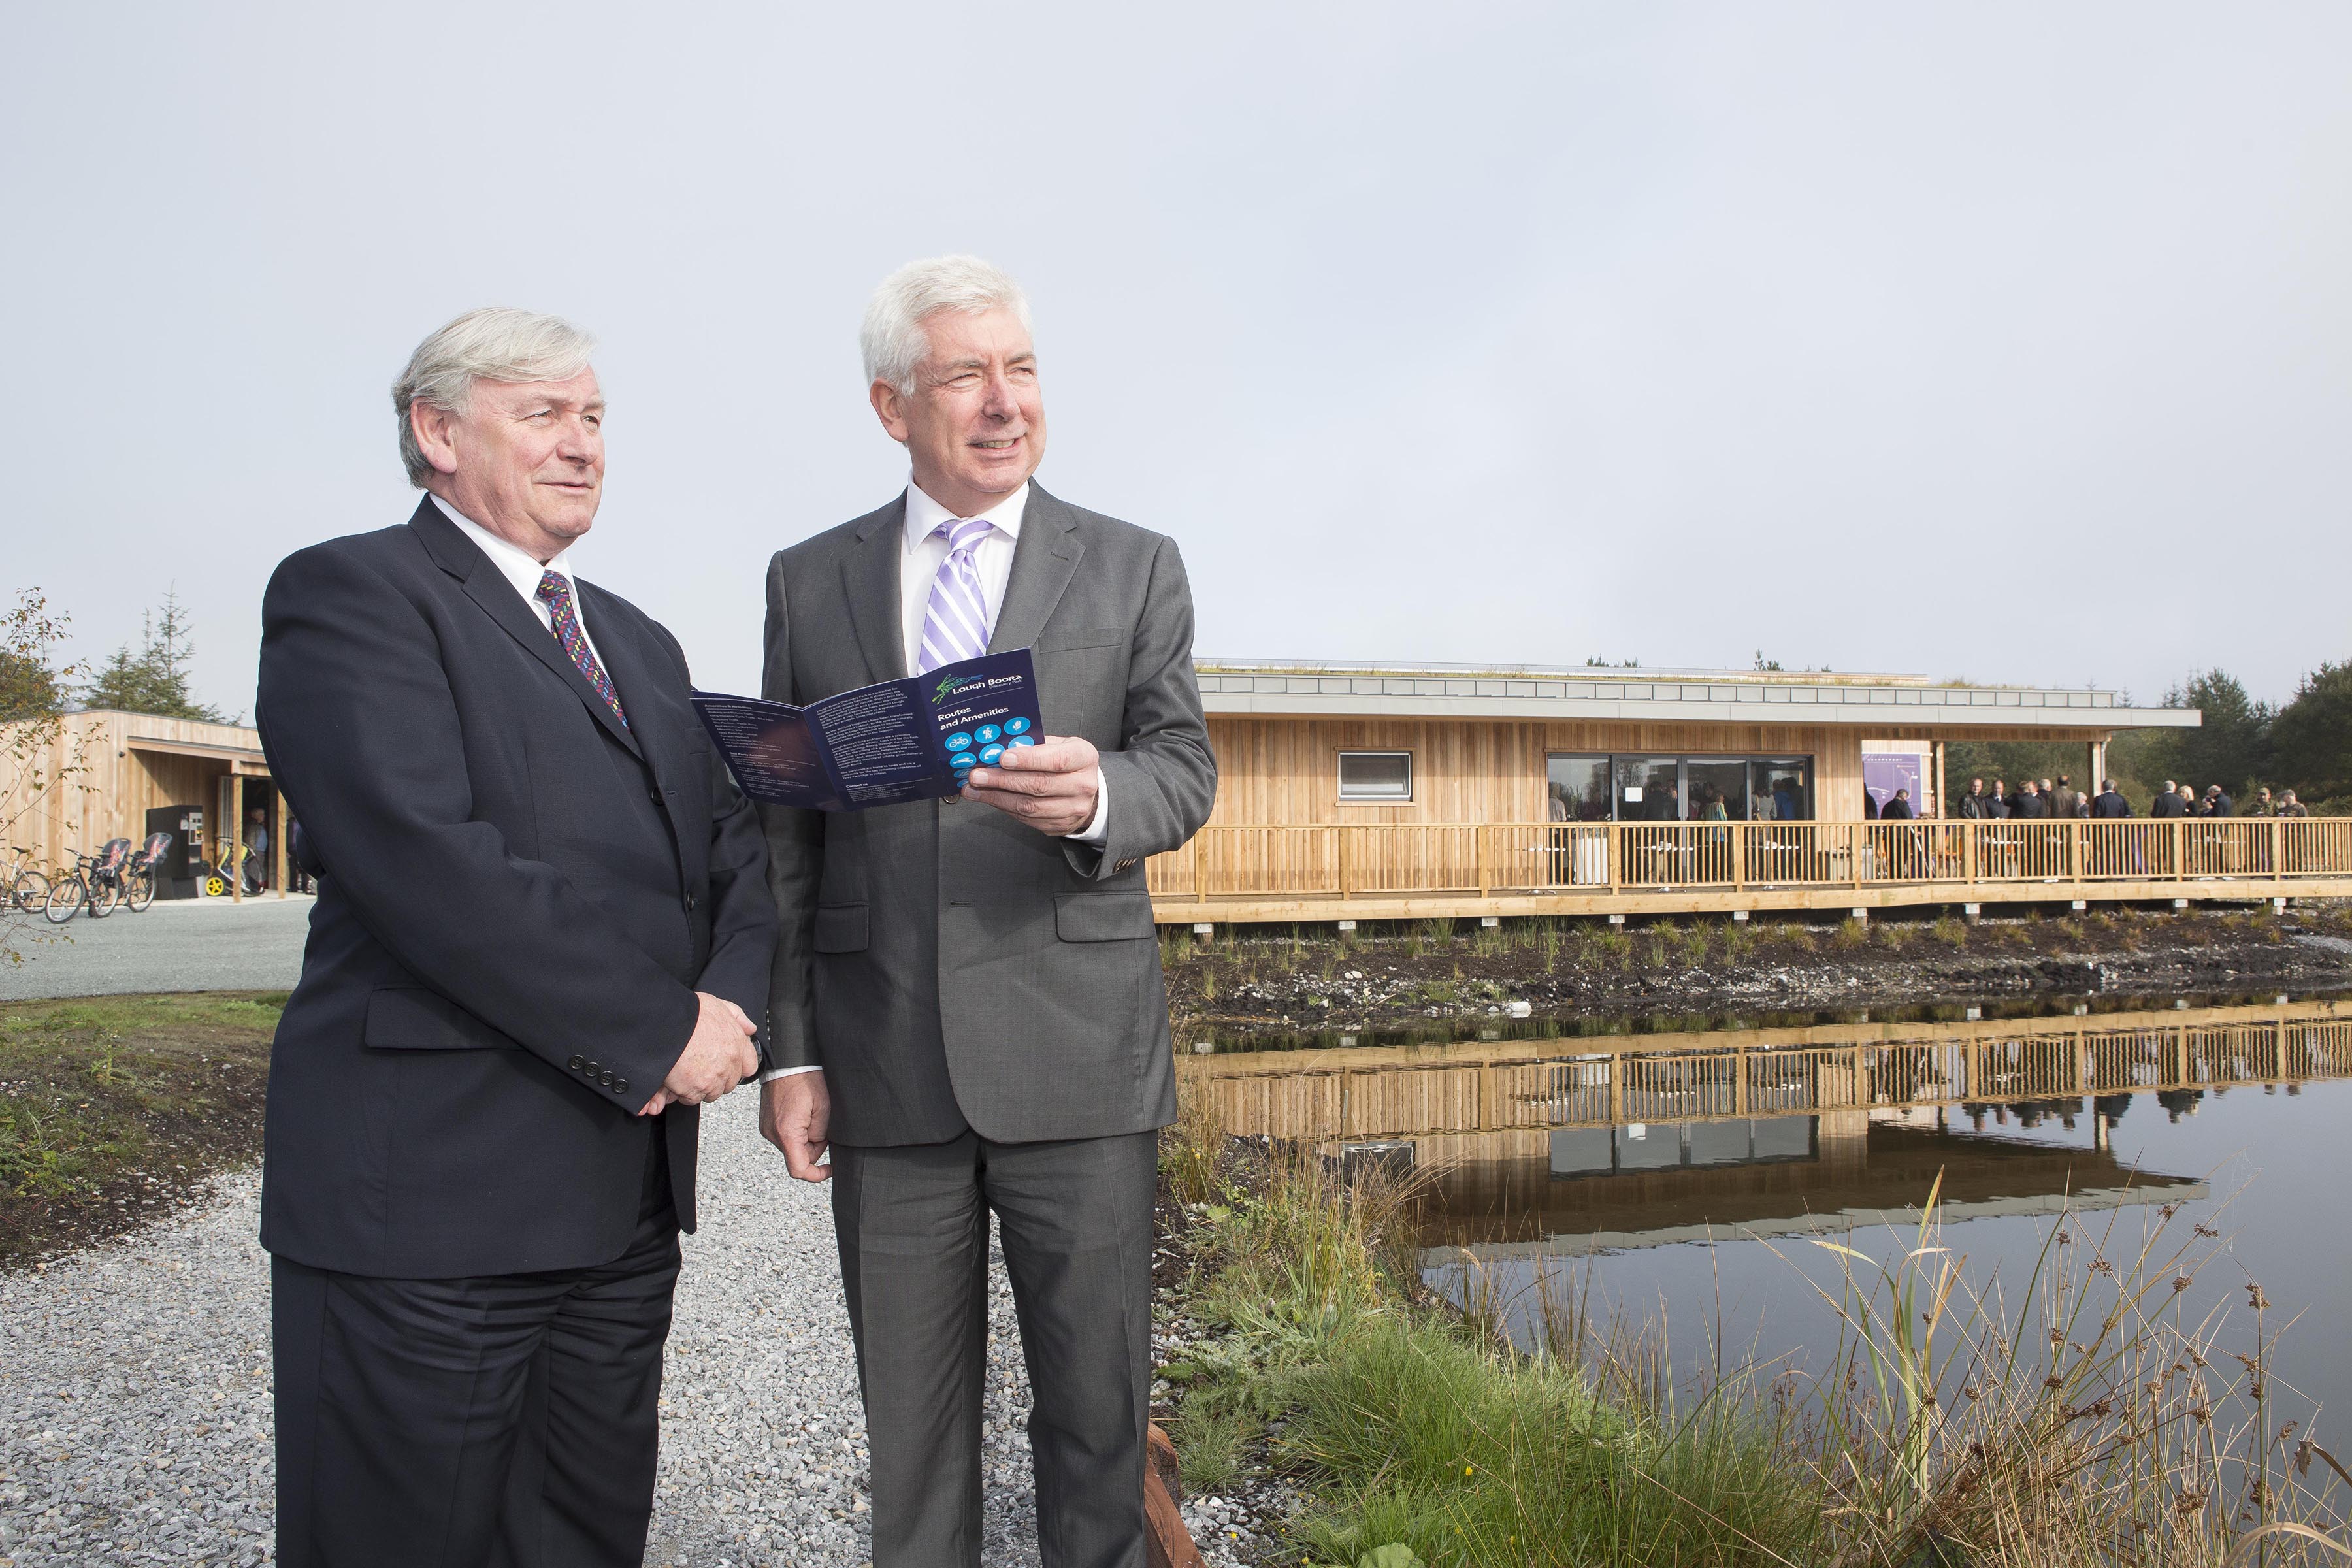 Minster Alex White opened the new €1.5 million Bord na Móna development, as part of the official launch of Lough Boora Discovery Park.